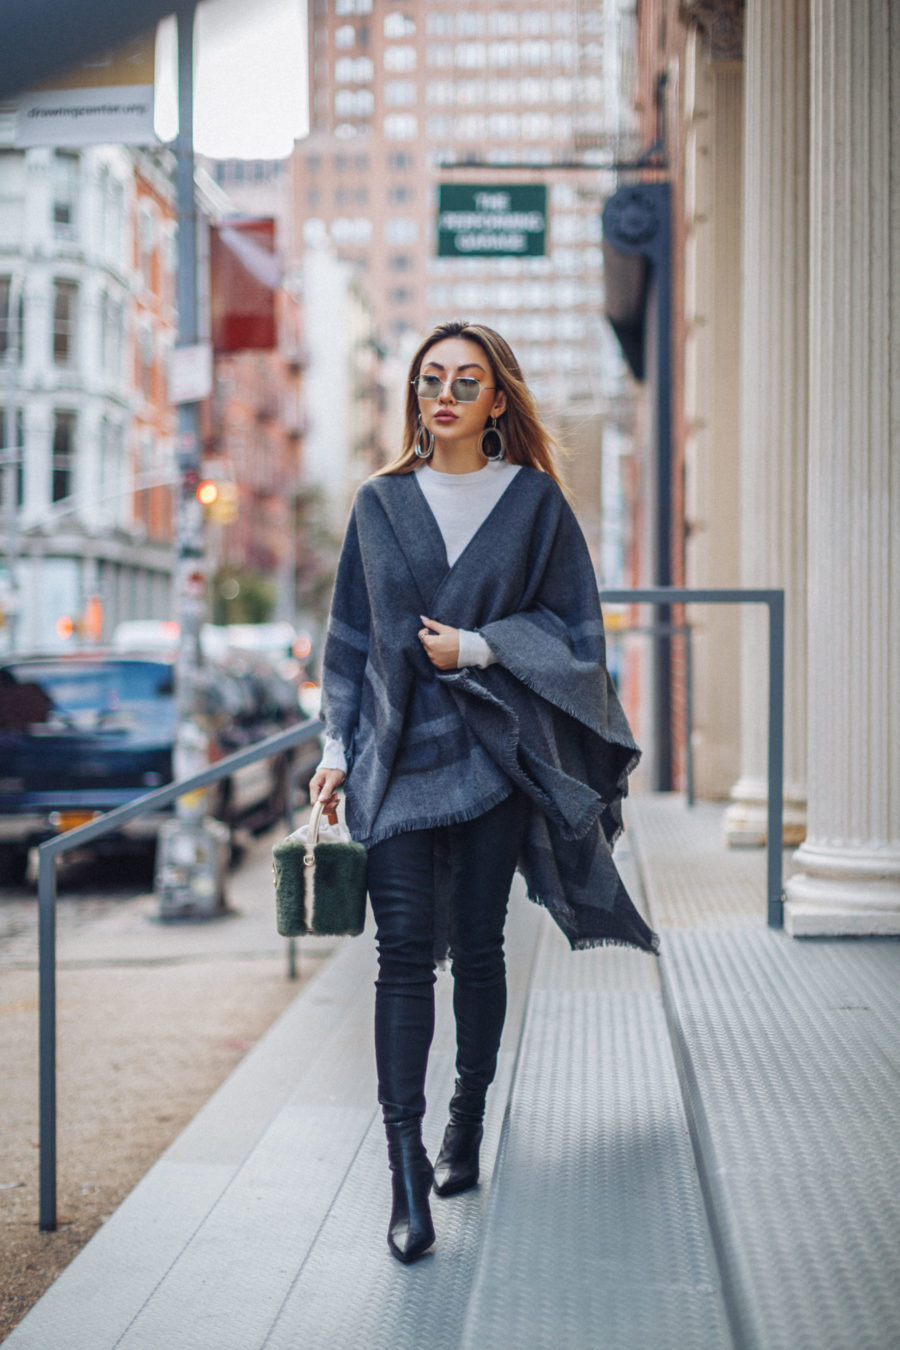 fashion blogger jessica wang wears poncho outfit while sharing postpartum style tips // Jessica Wang - Notjessfashion.com